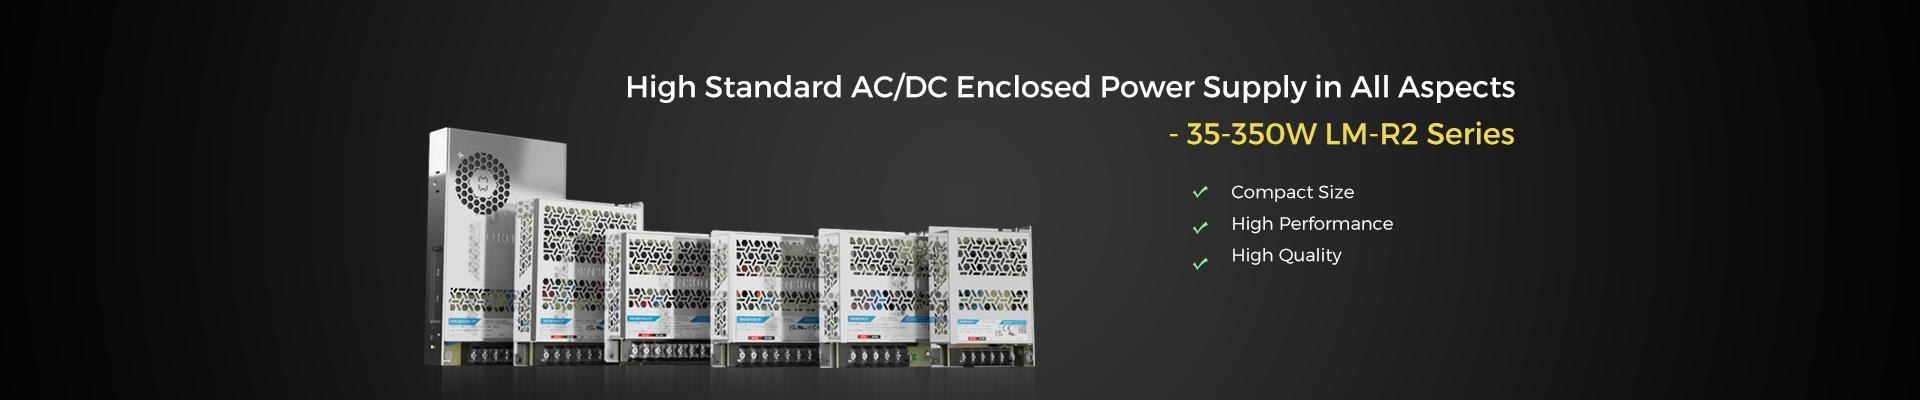 High Standard AC/DC Enclosed Power Supply in All Aspects- 35-350W LM-R2 Series